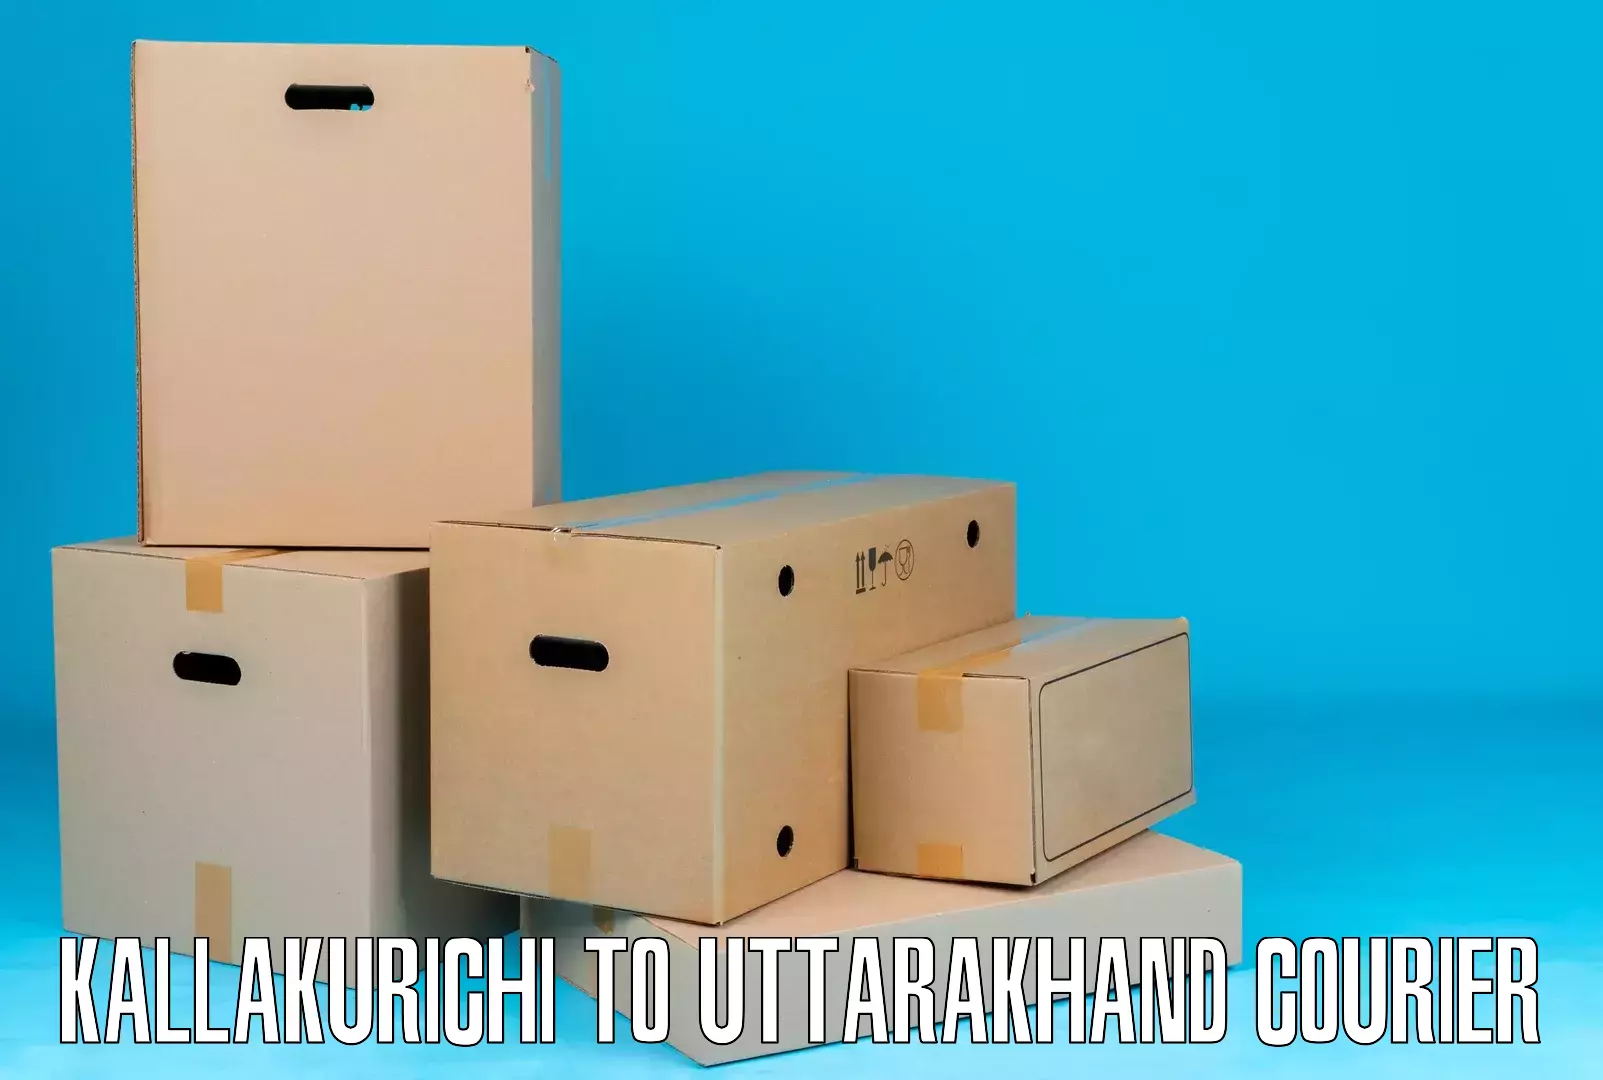 End-to-end delivery Kallakurichi to Tehri Garhwal